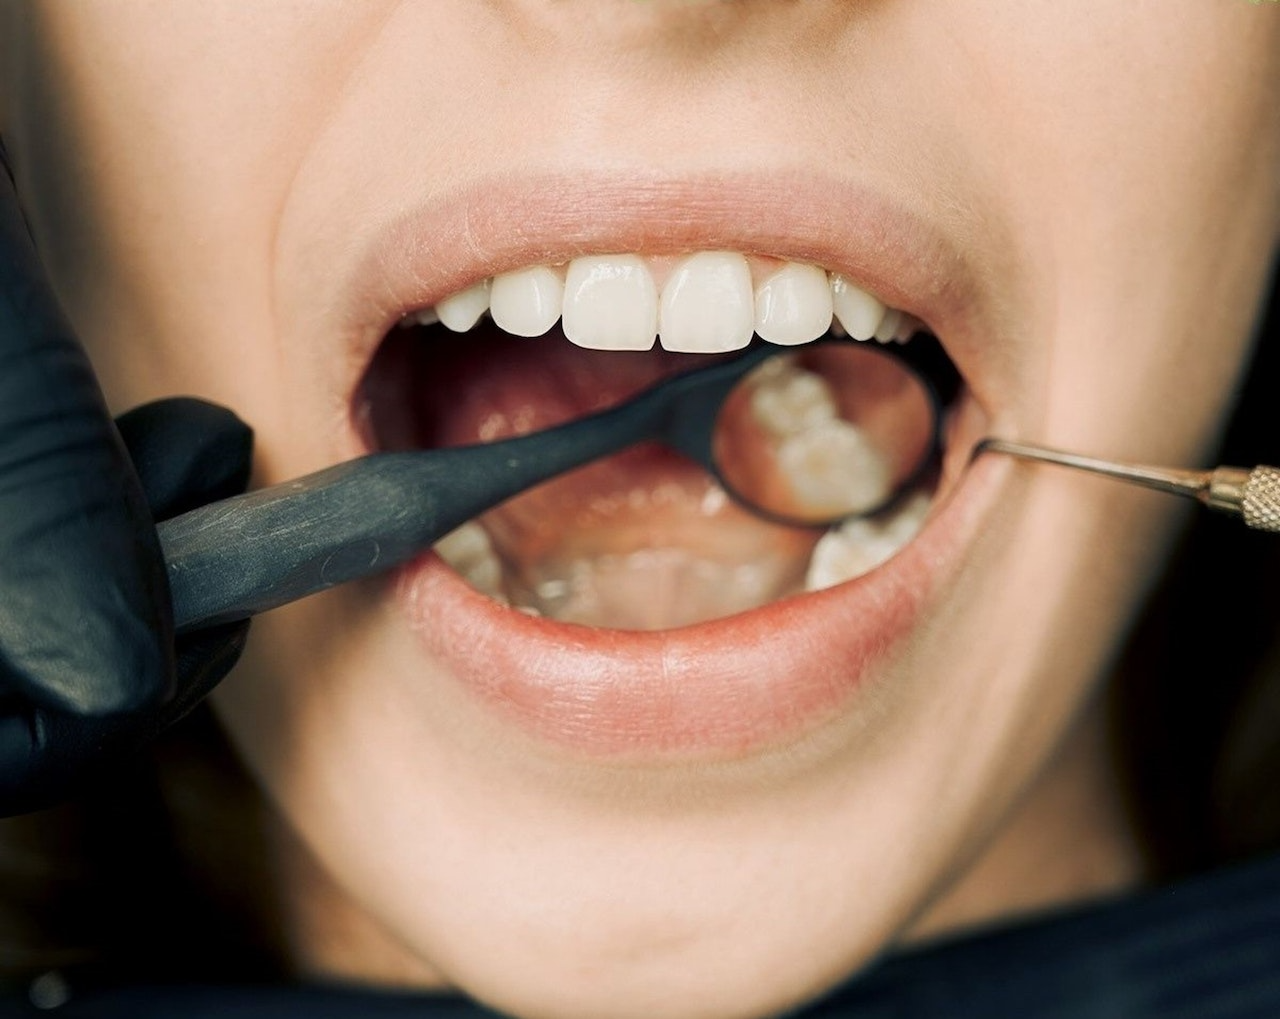 Why do tooth fillings fall out? Common Reasons for Tooth Fillings Falling Out